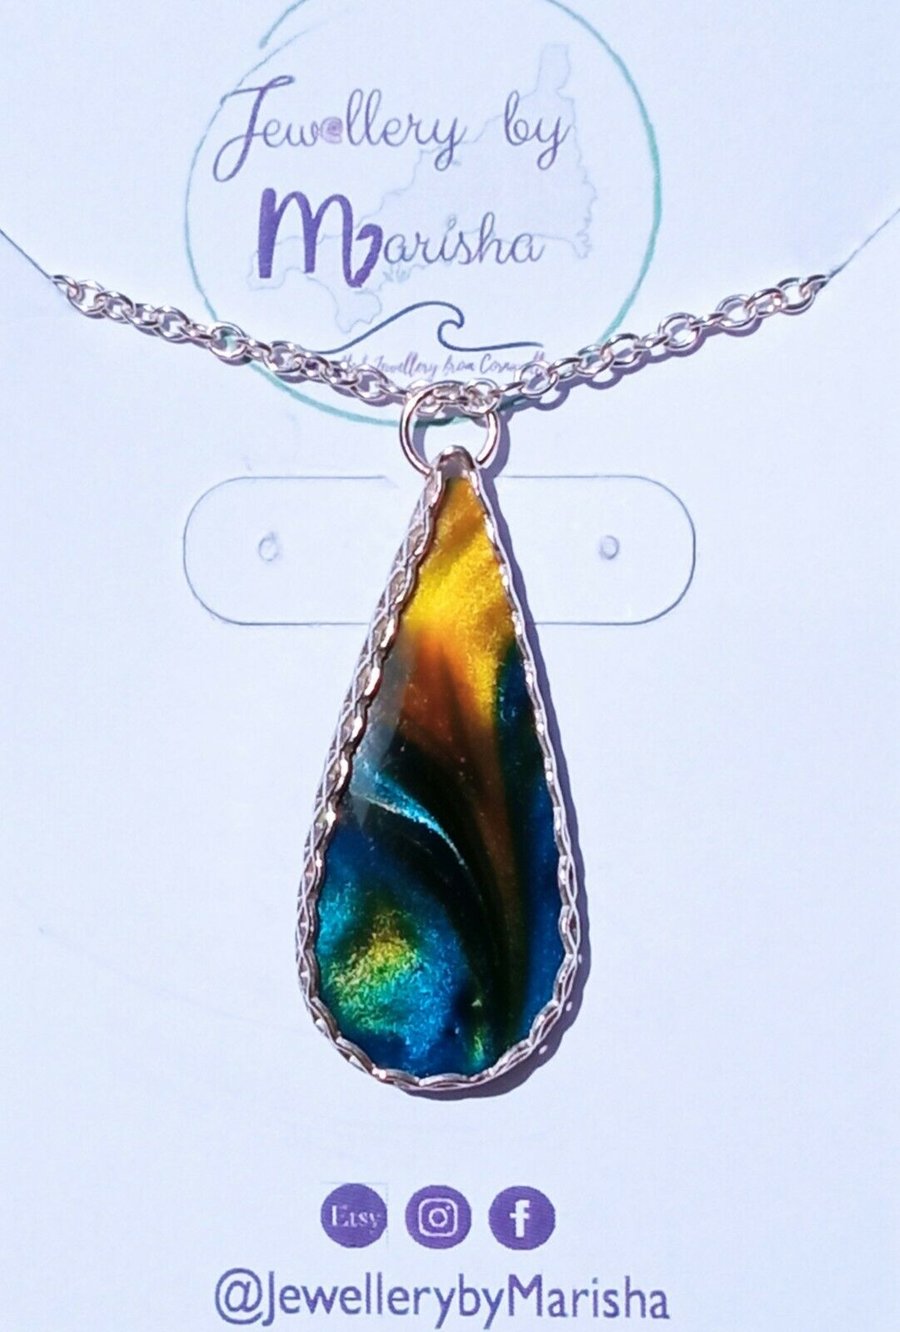 Surfite Blue & Yellow Pearlescent Teardrop Pendant on Silver 925 Necklace